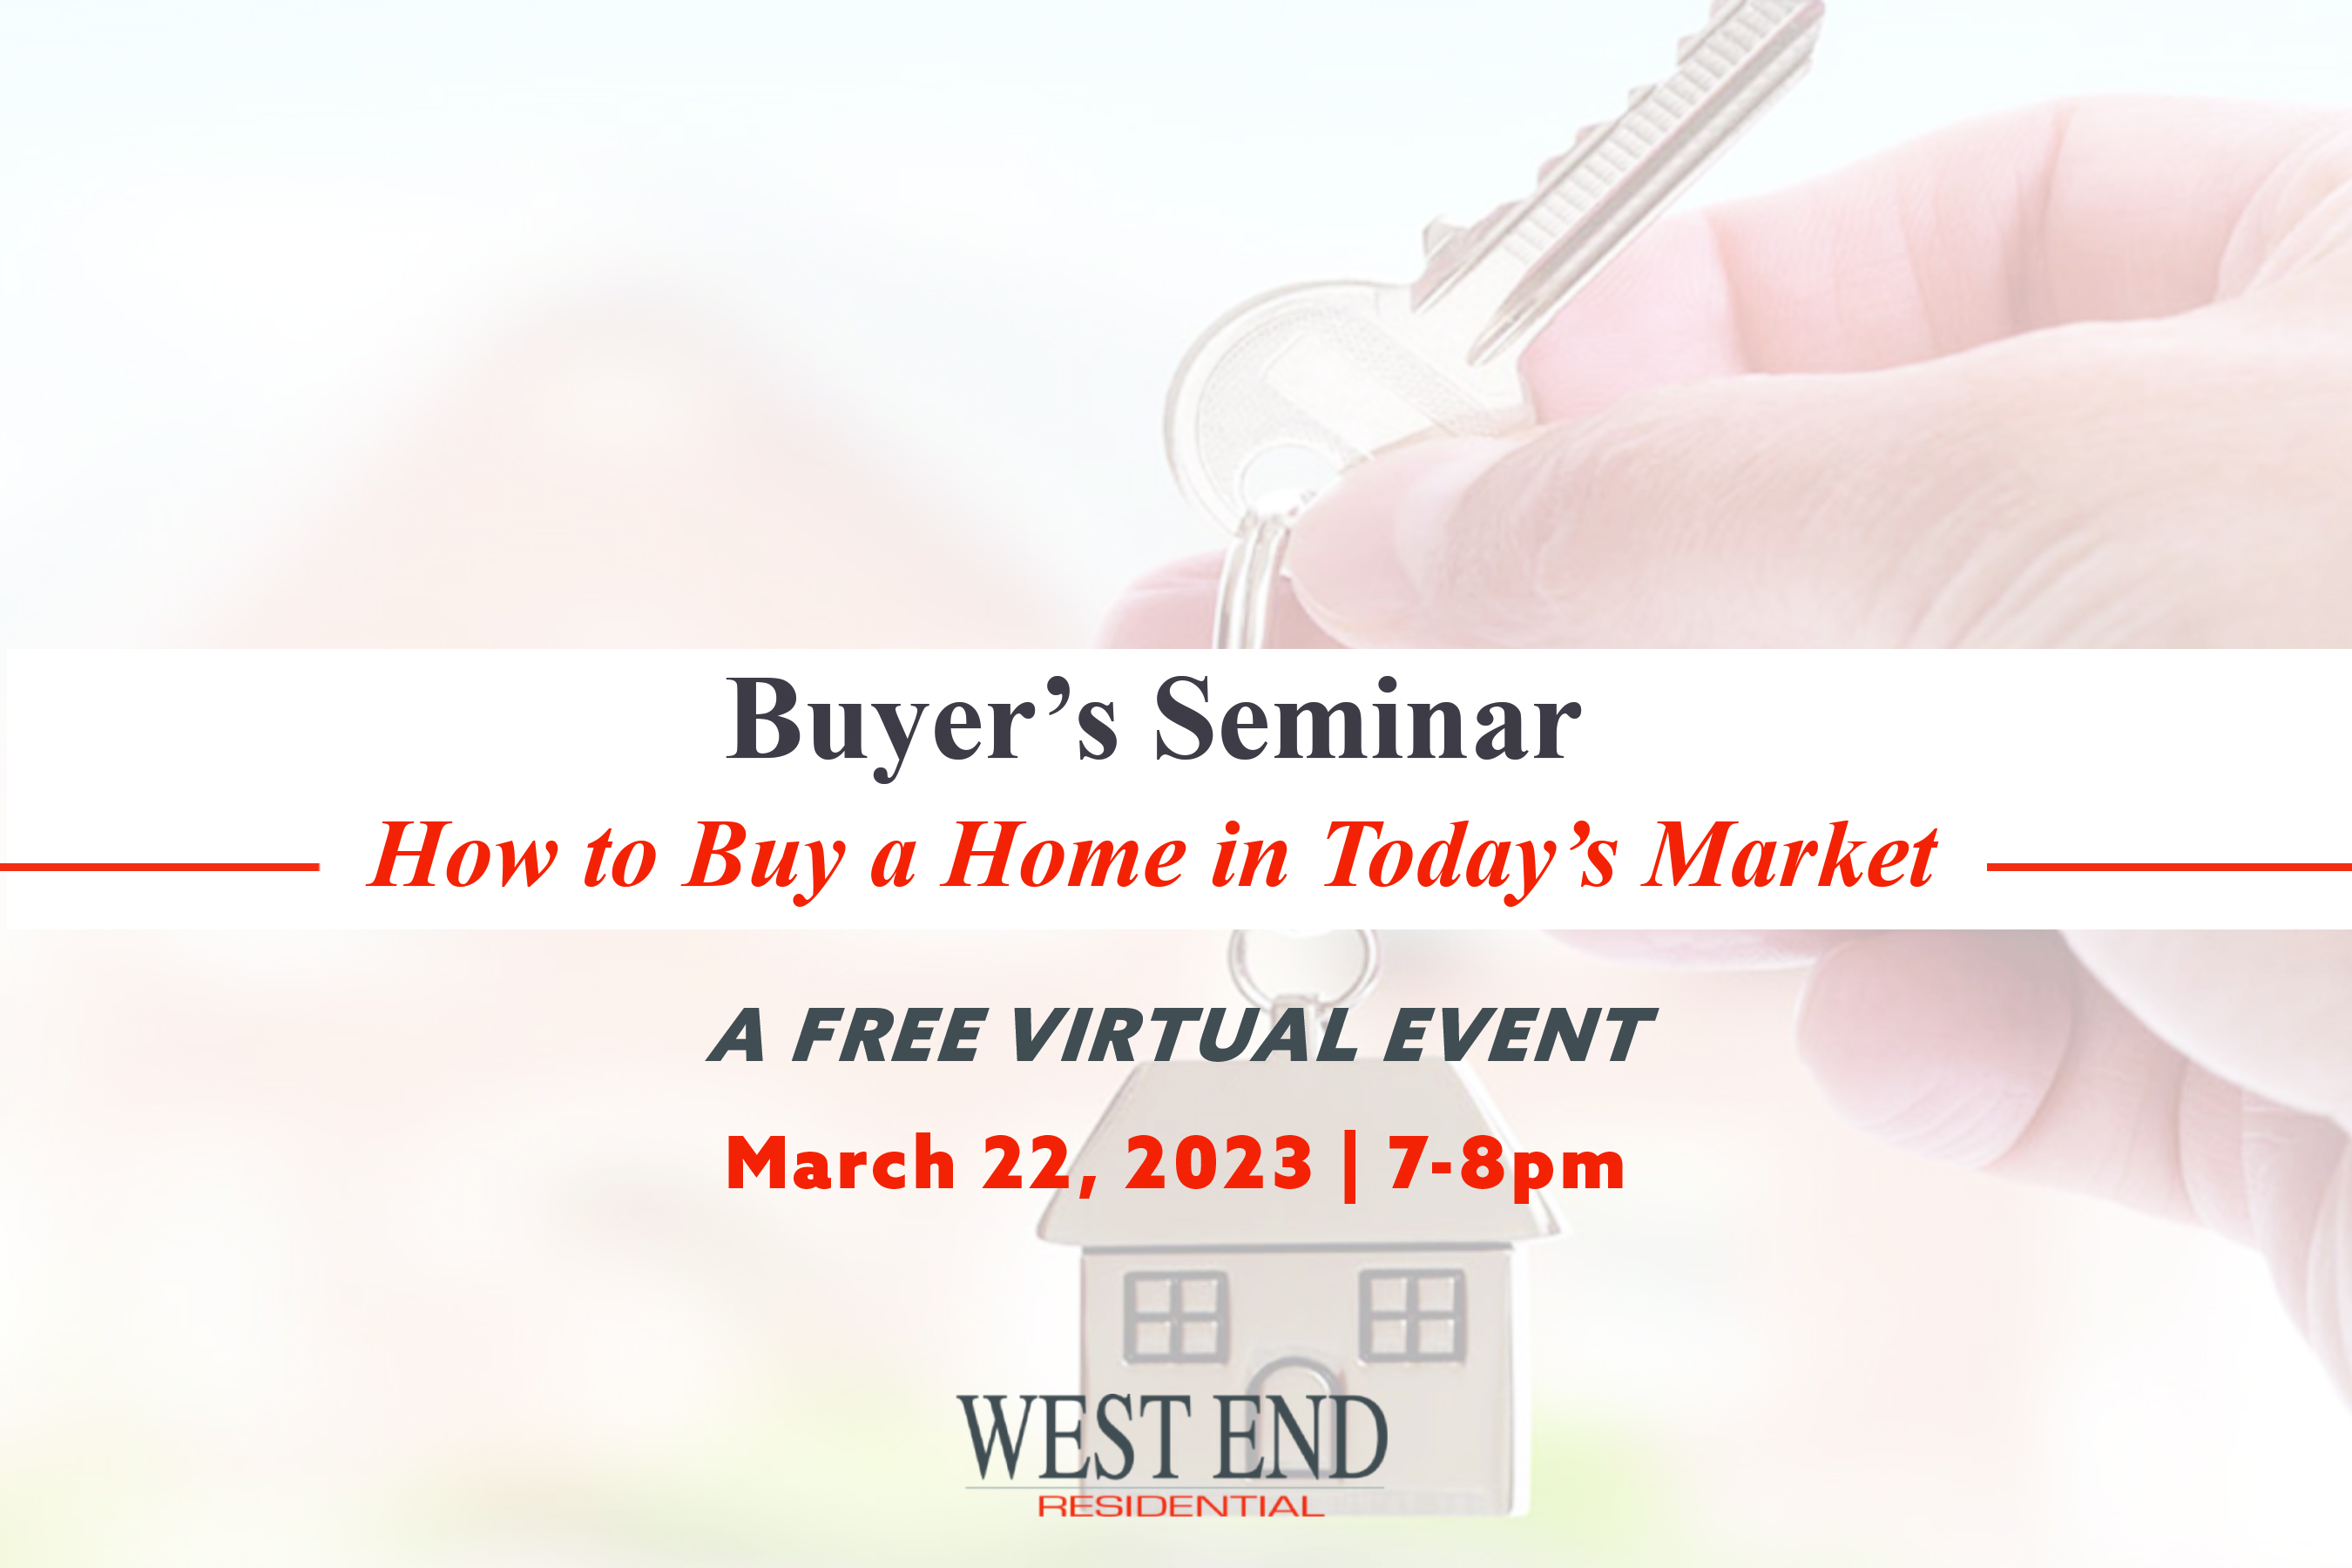 Buyer's Seminar | How to Buy a Home in Today's Market